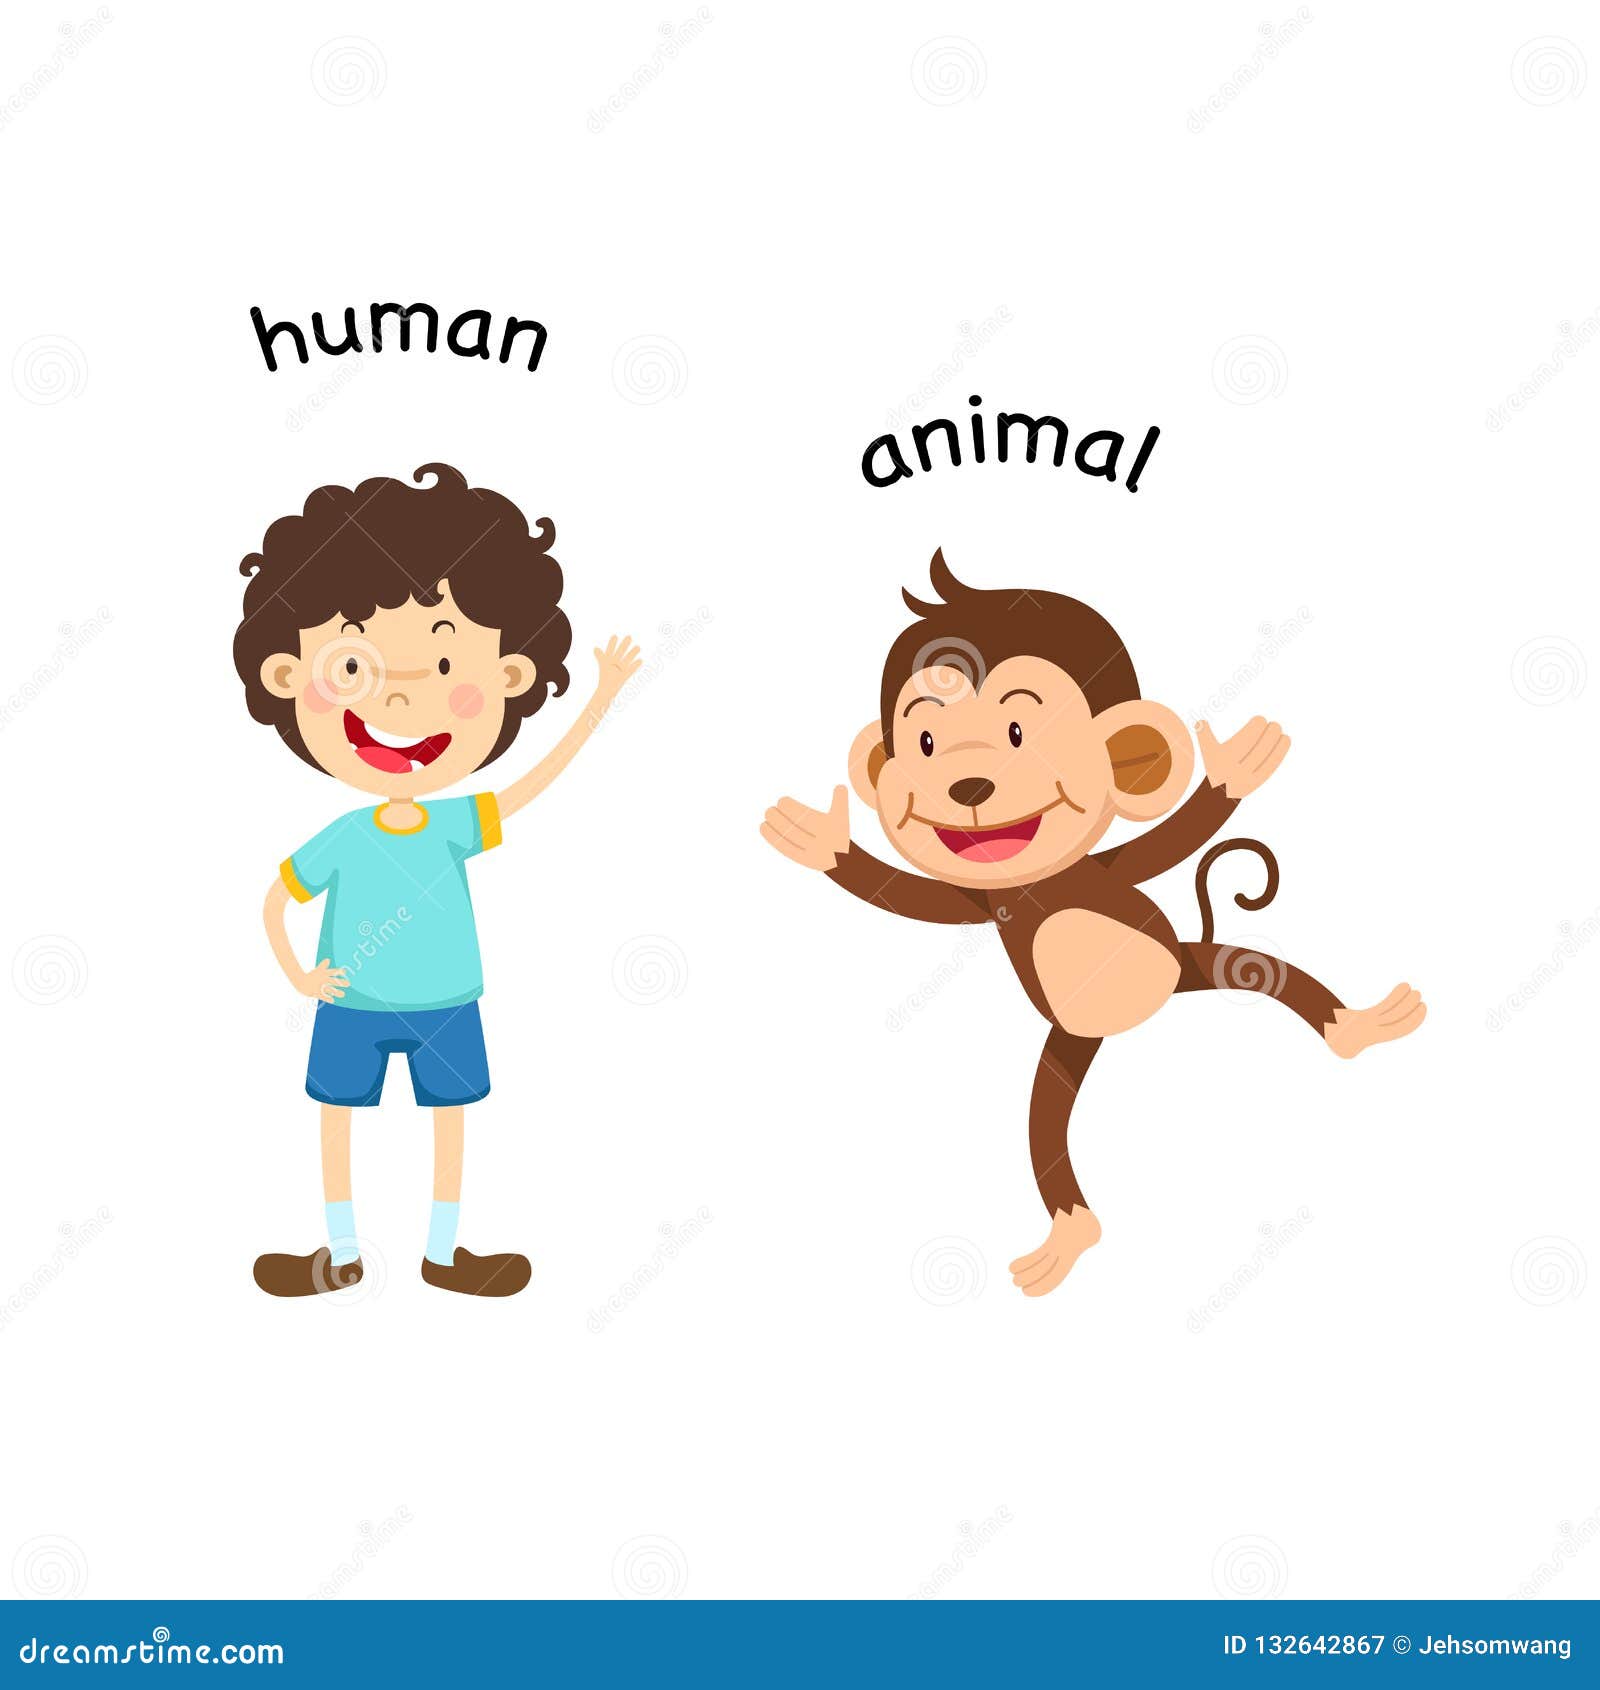 Opposite human and animal stock vector. Illustration of graphic - 132642867